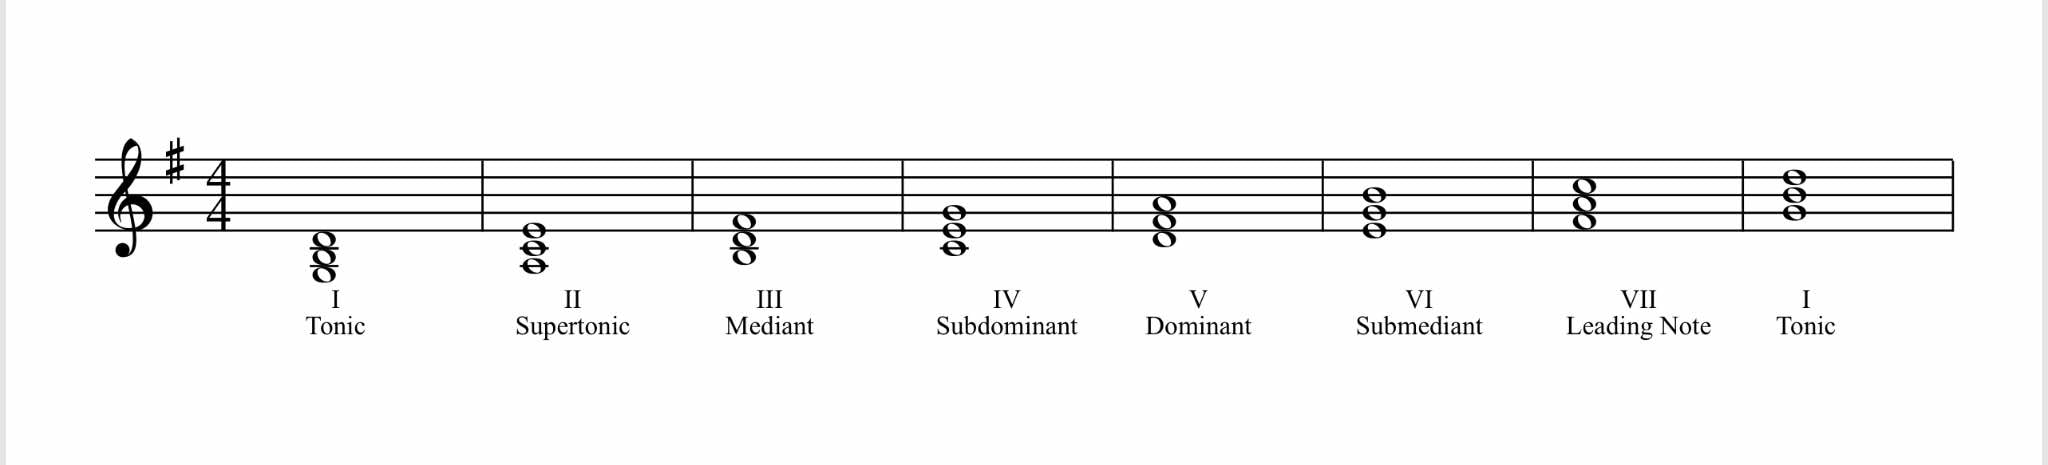 Chords in the scale of G major